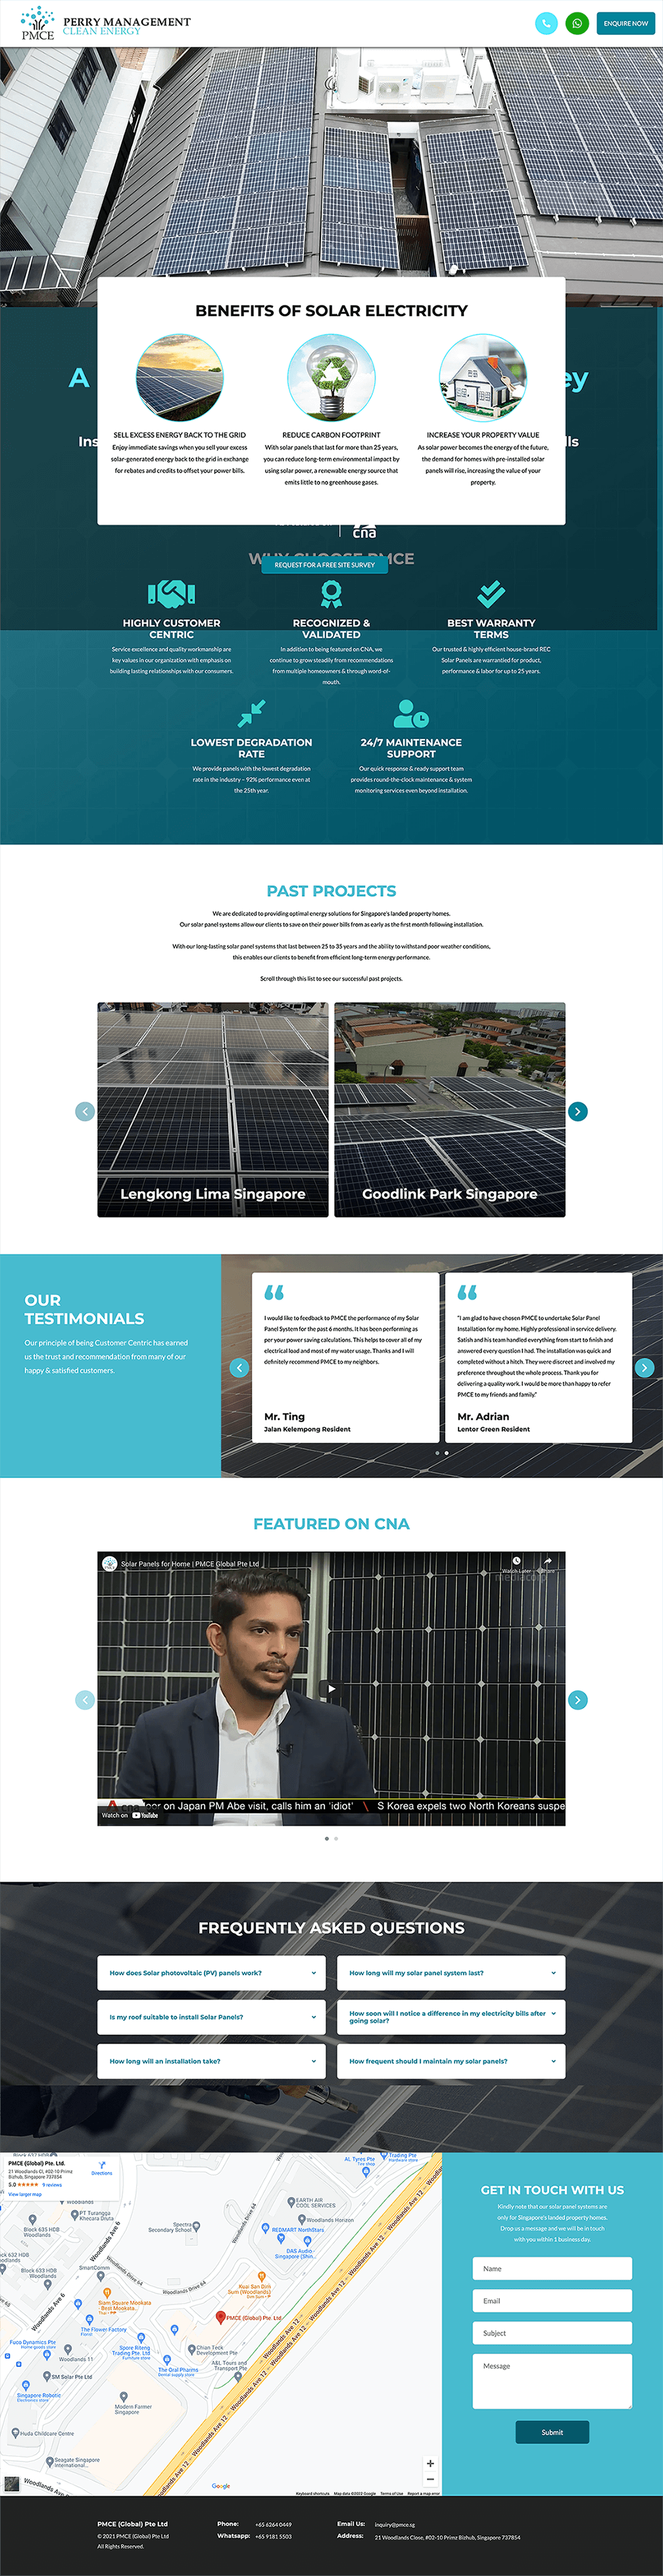 Perry Management Clean Energy Web Page